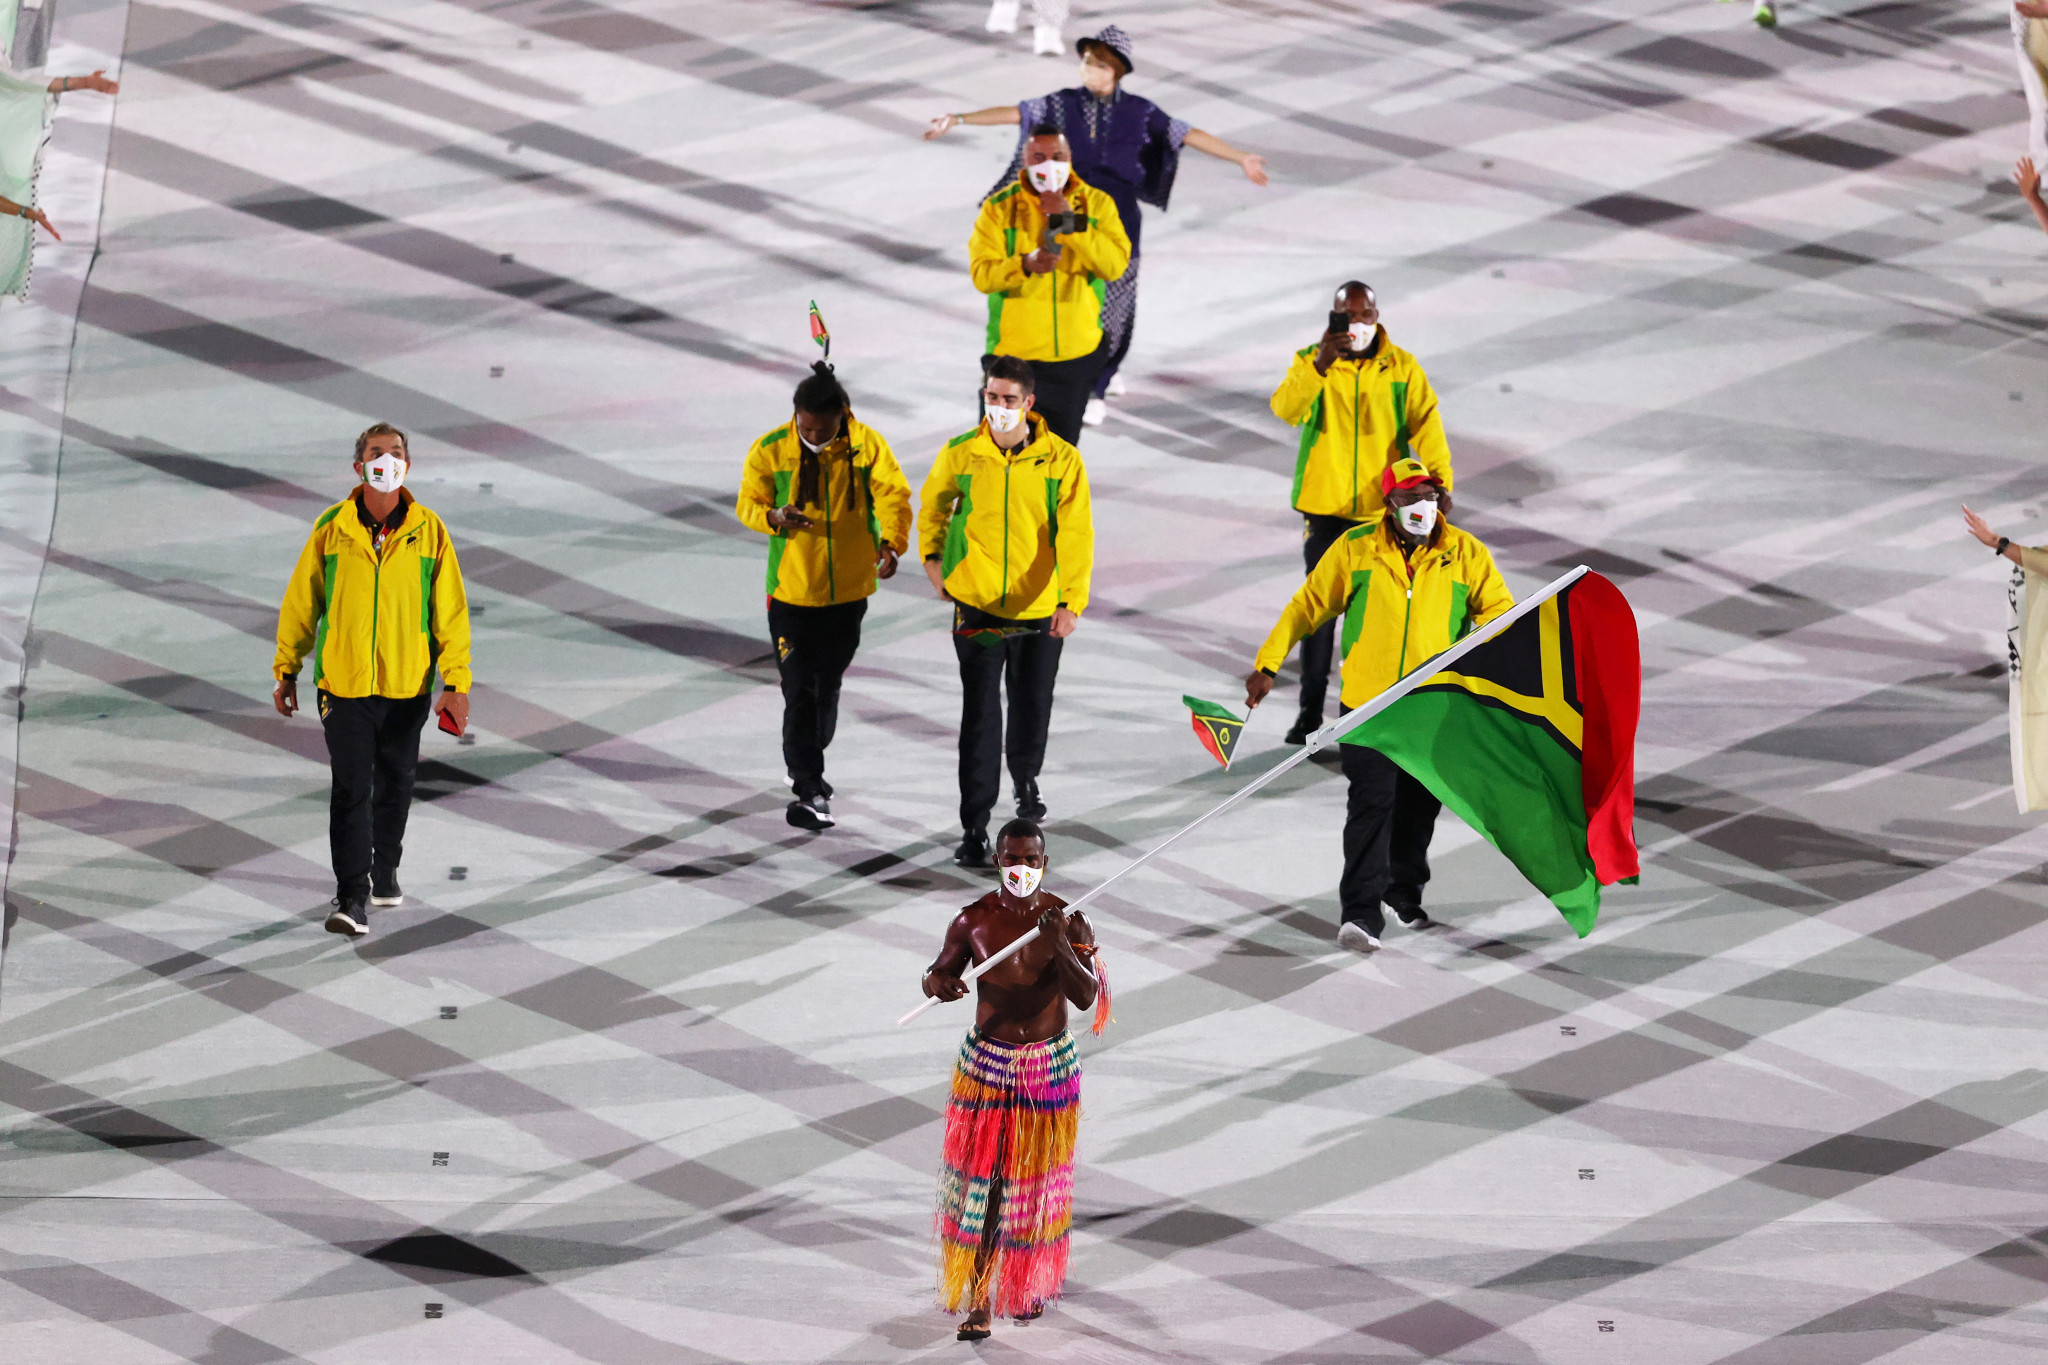 Vanuatu's Tokyo 2020 Chef de Mission Williams Worworkon thanked its three Olympic athletes for their cooperation with COVID-19 protocols at the Games ©Getty Images